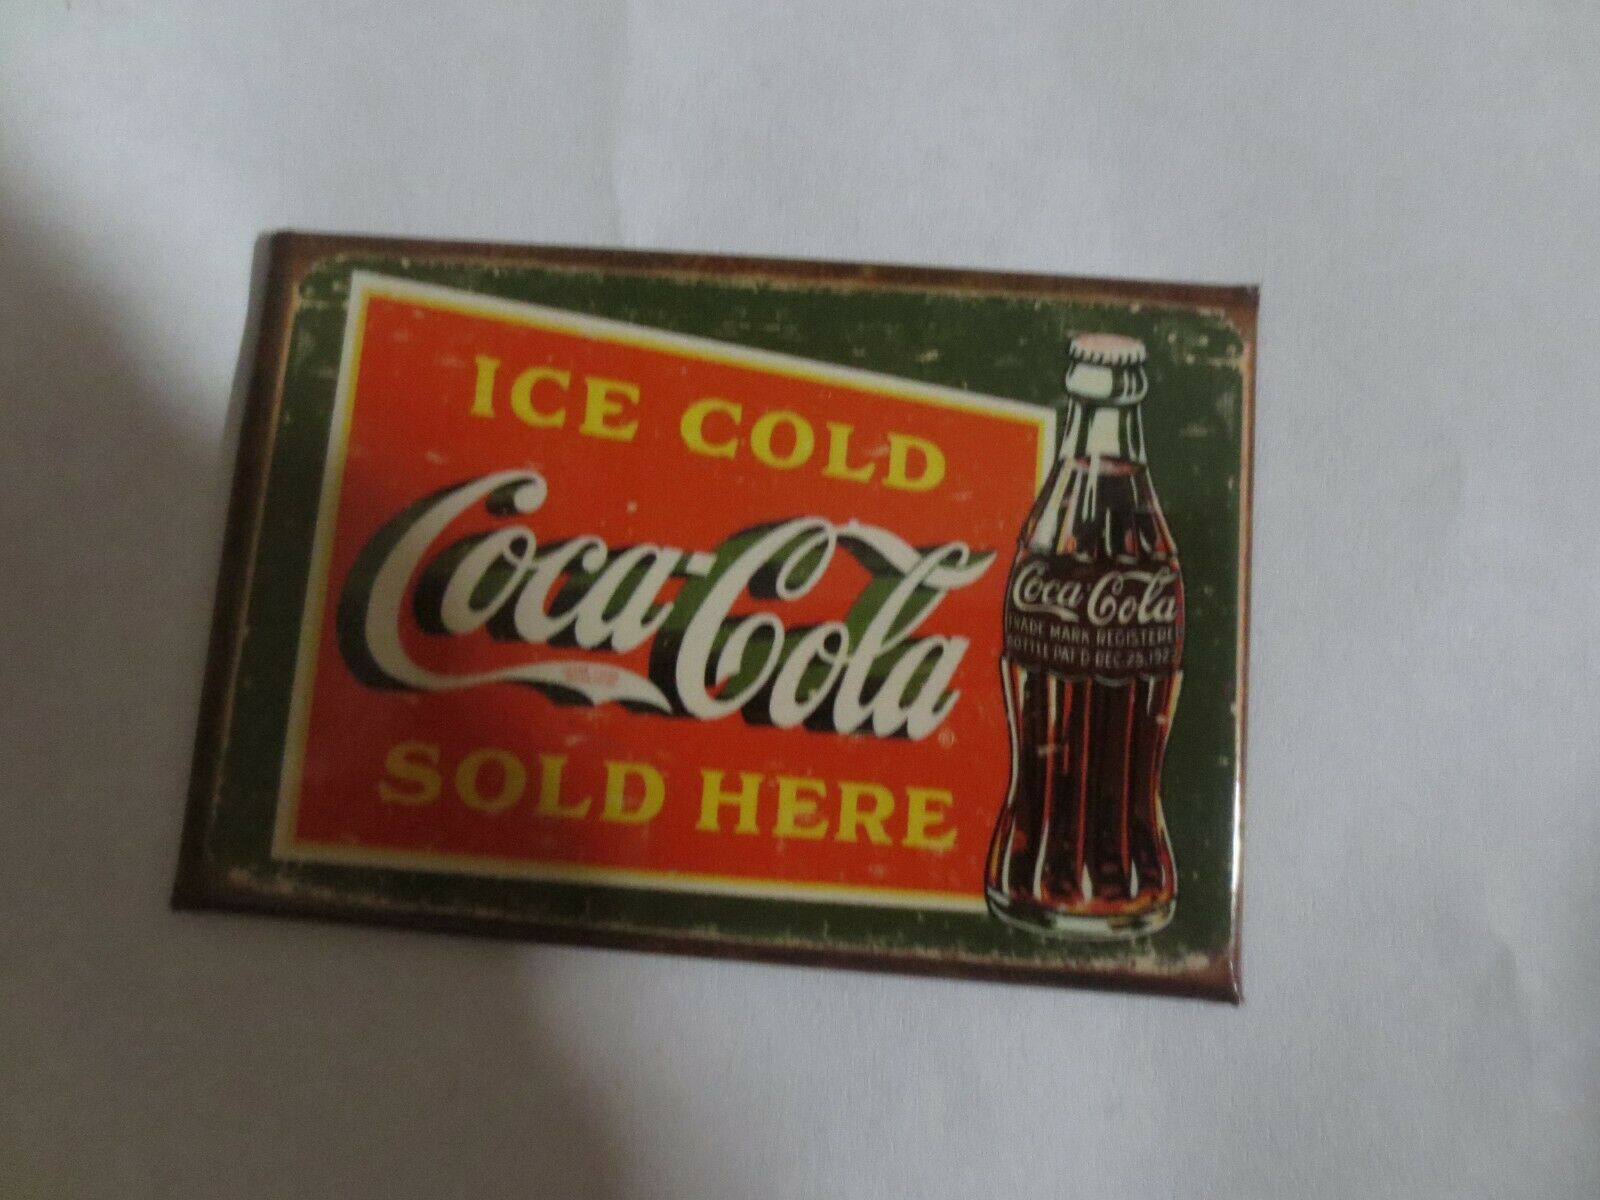 Primary image for Coca-Cola Magnet with plastsic overlap Ice Cold Sold Here